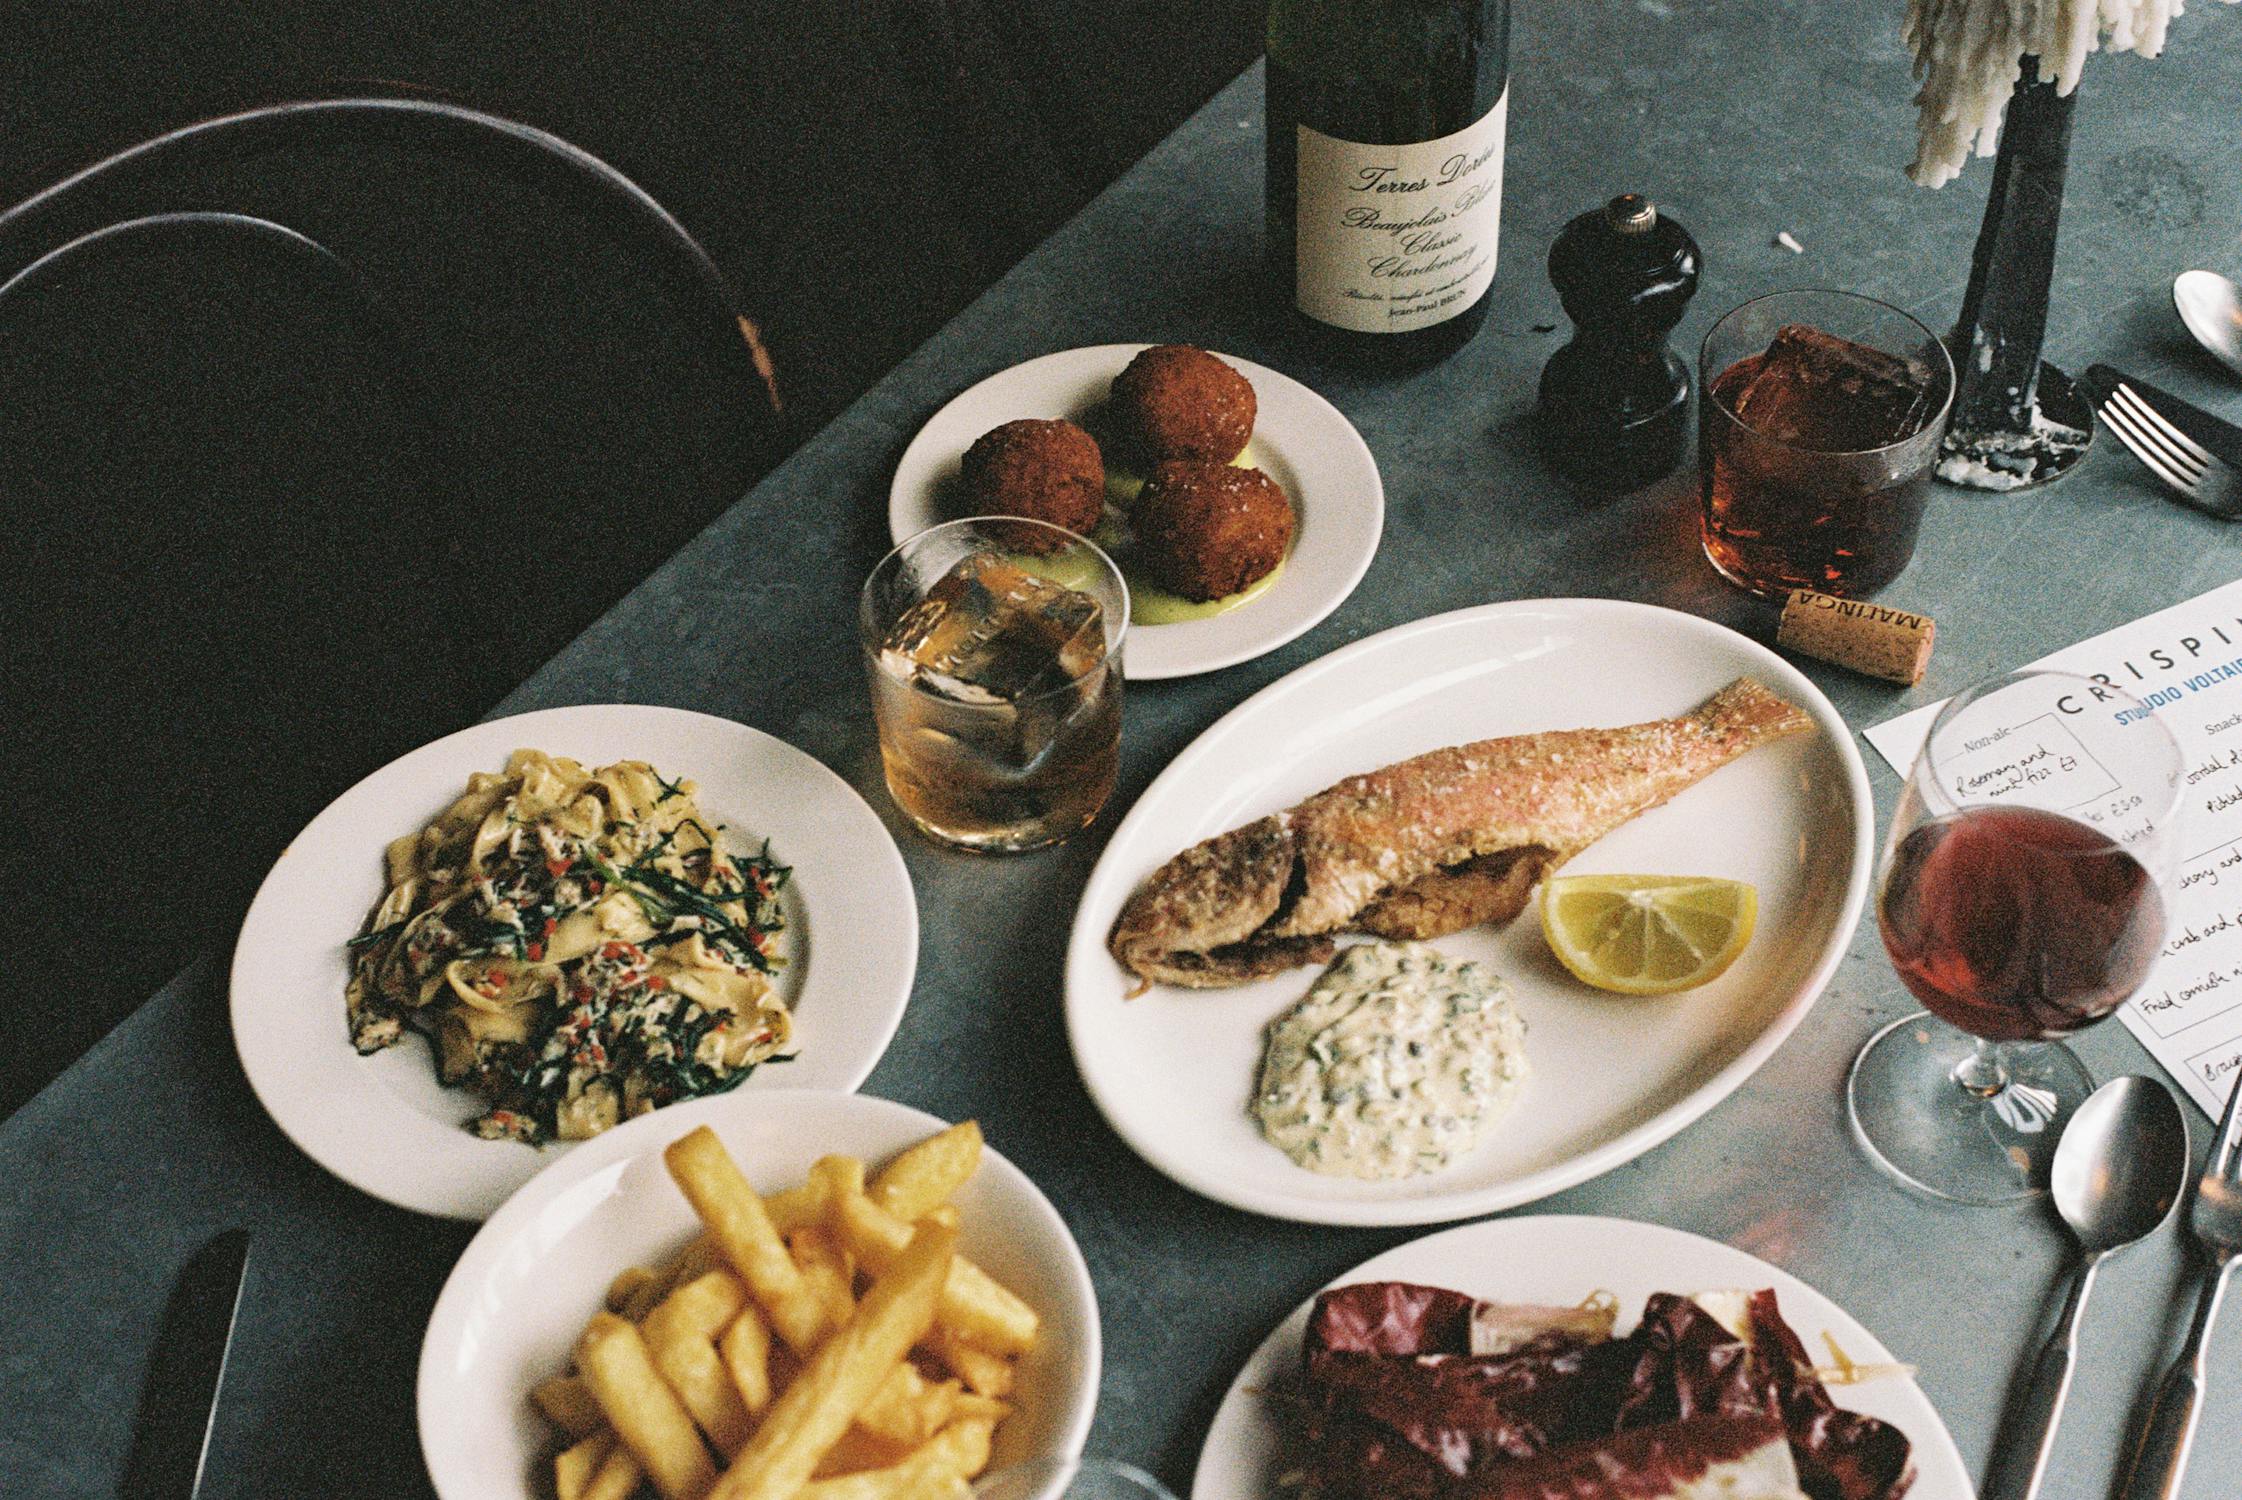 A photograph of a table with plates of food and drinks. There is a bowl of chips, a fried fish, croquettes, and different drinks that include red wine, a cocktail and a menu.